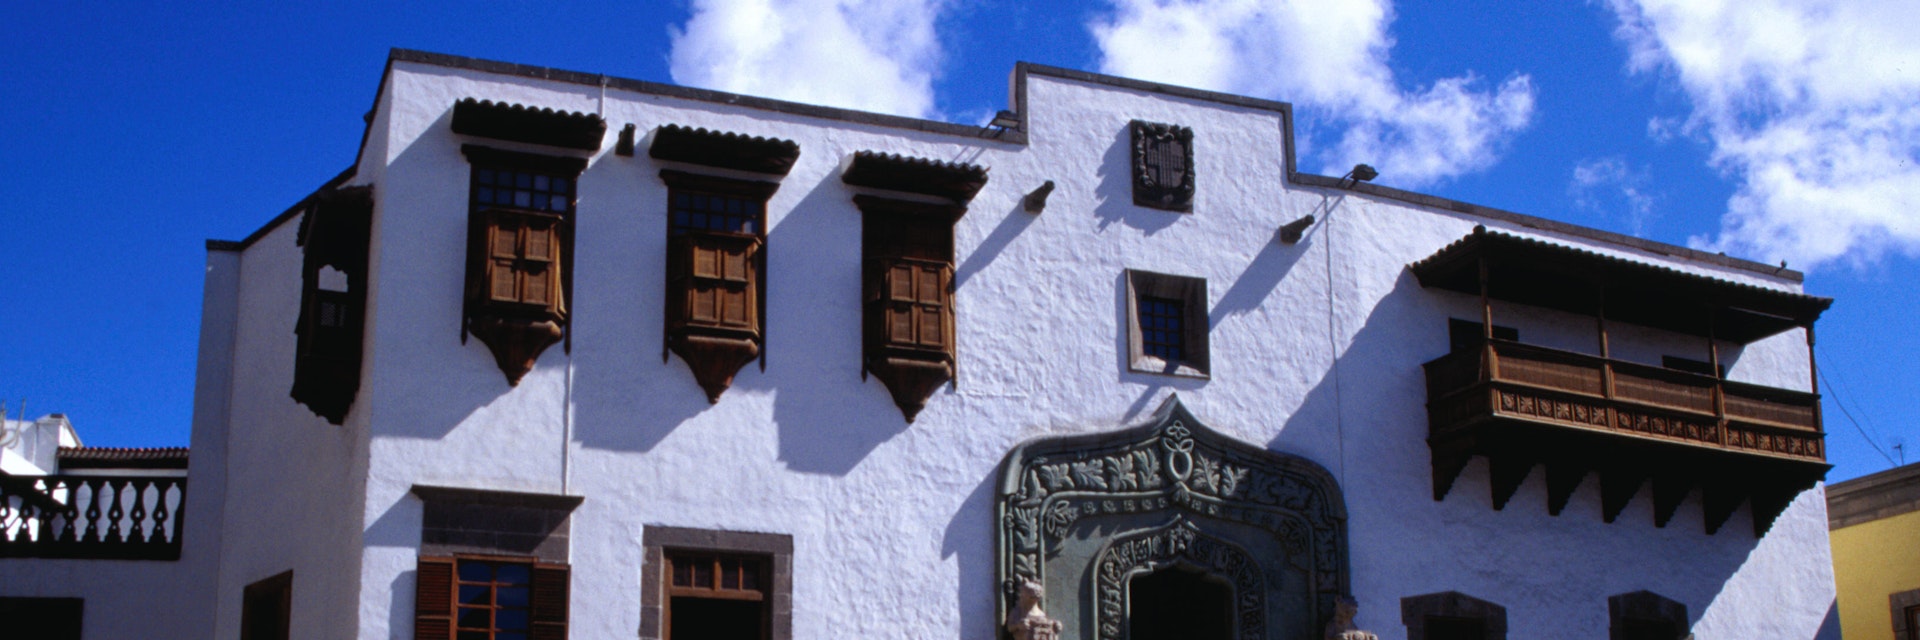 The facade of the Casa de Colon (also known as Columbus House), a museum in Las Palmas and a fine example of Canarian architecture.